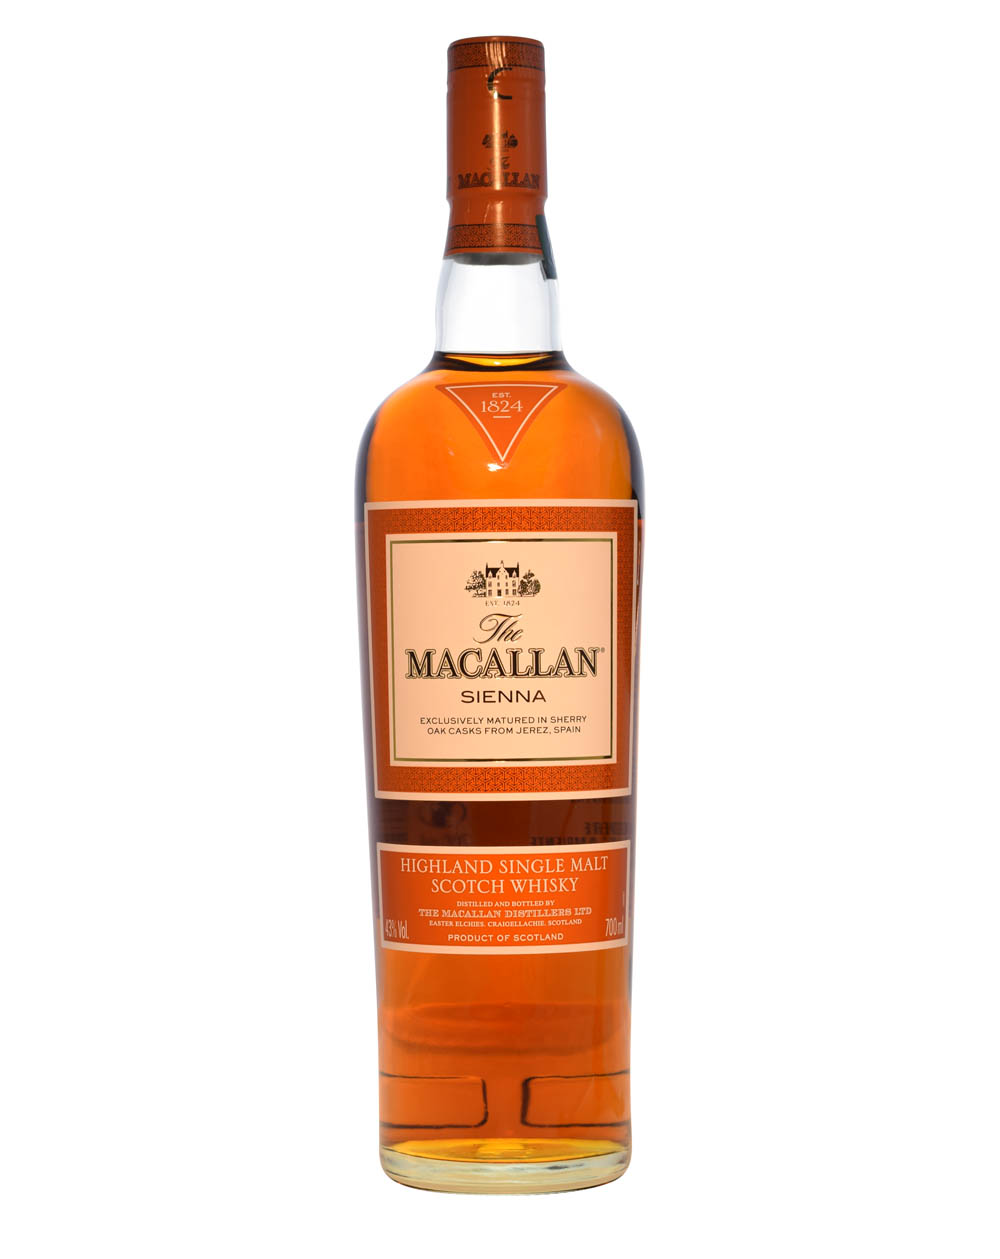 Macallan Sienna Musthave Malts MHM